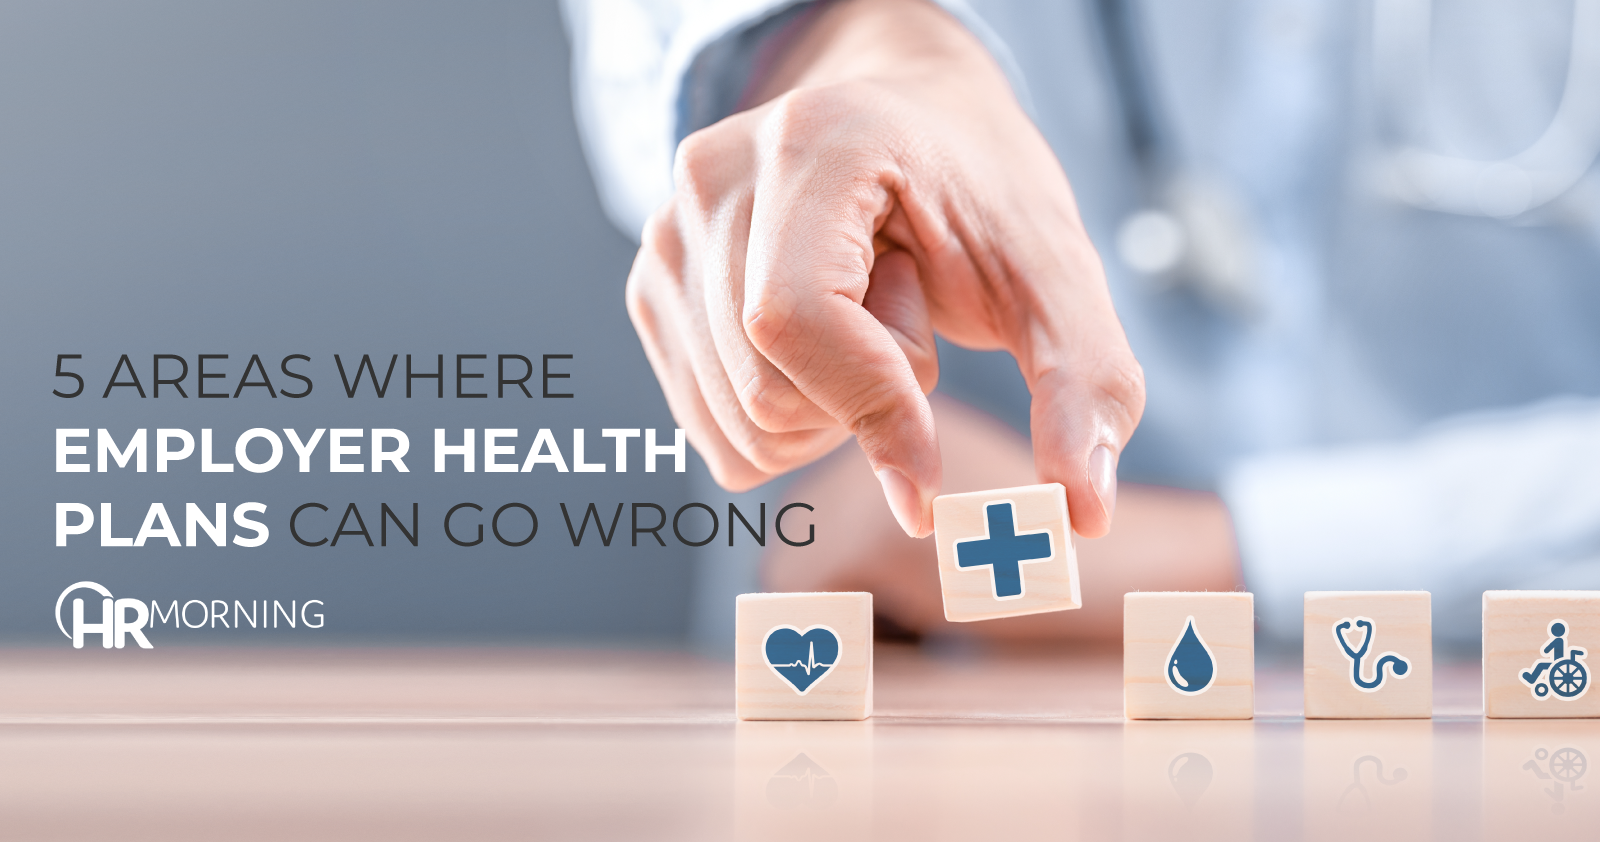 5 areas where employer health plans can go wrong